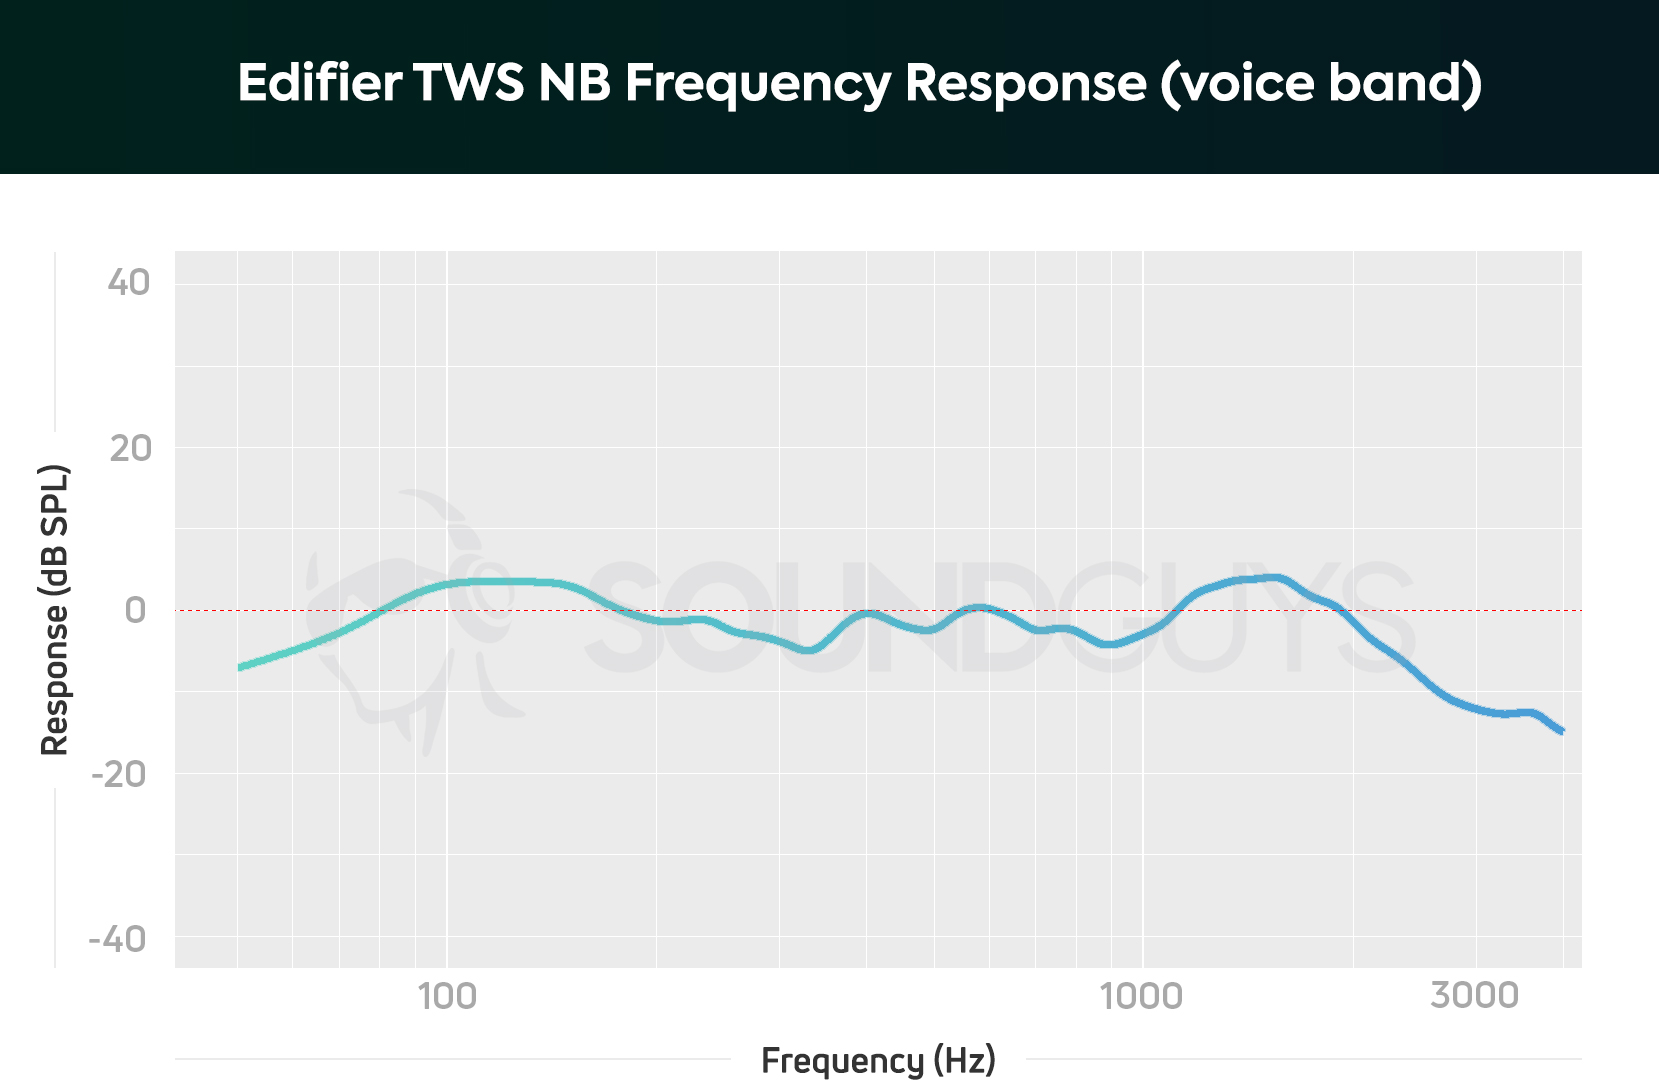 A chart depicting the Edifier TWS NB noise canceling true wireless earbuds' frequency response, which is even across the human voice band.